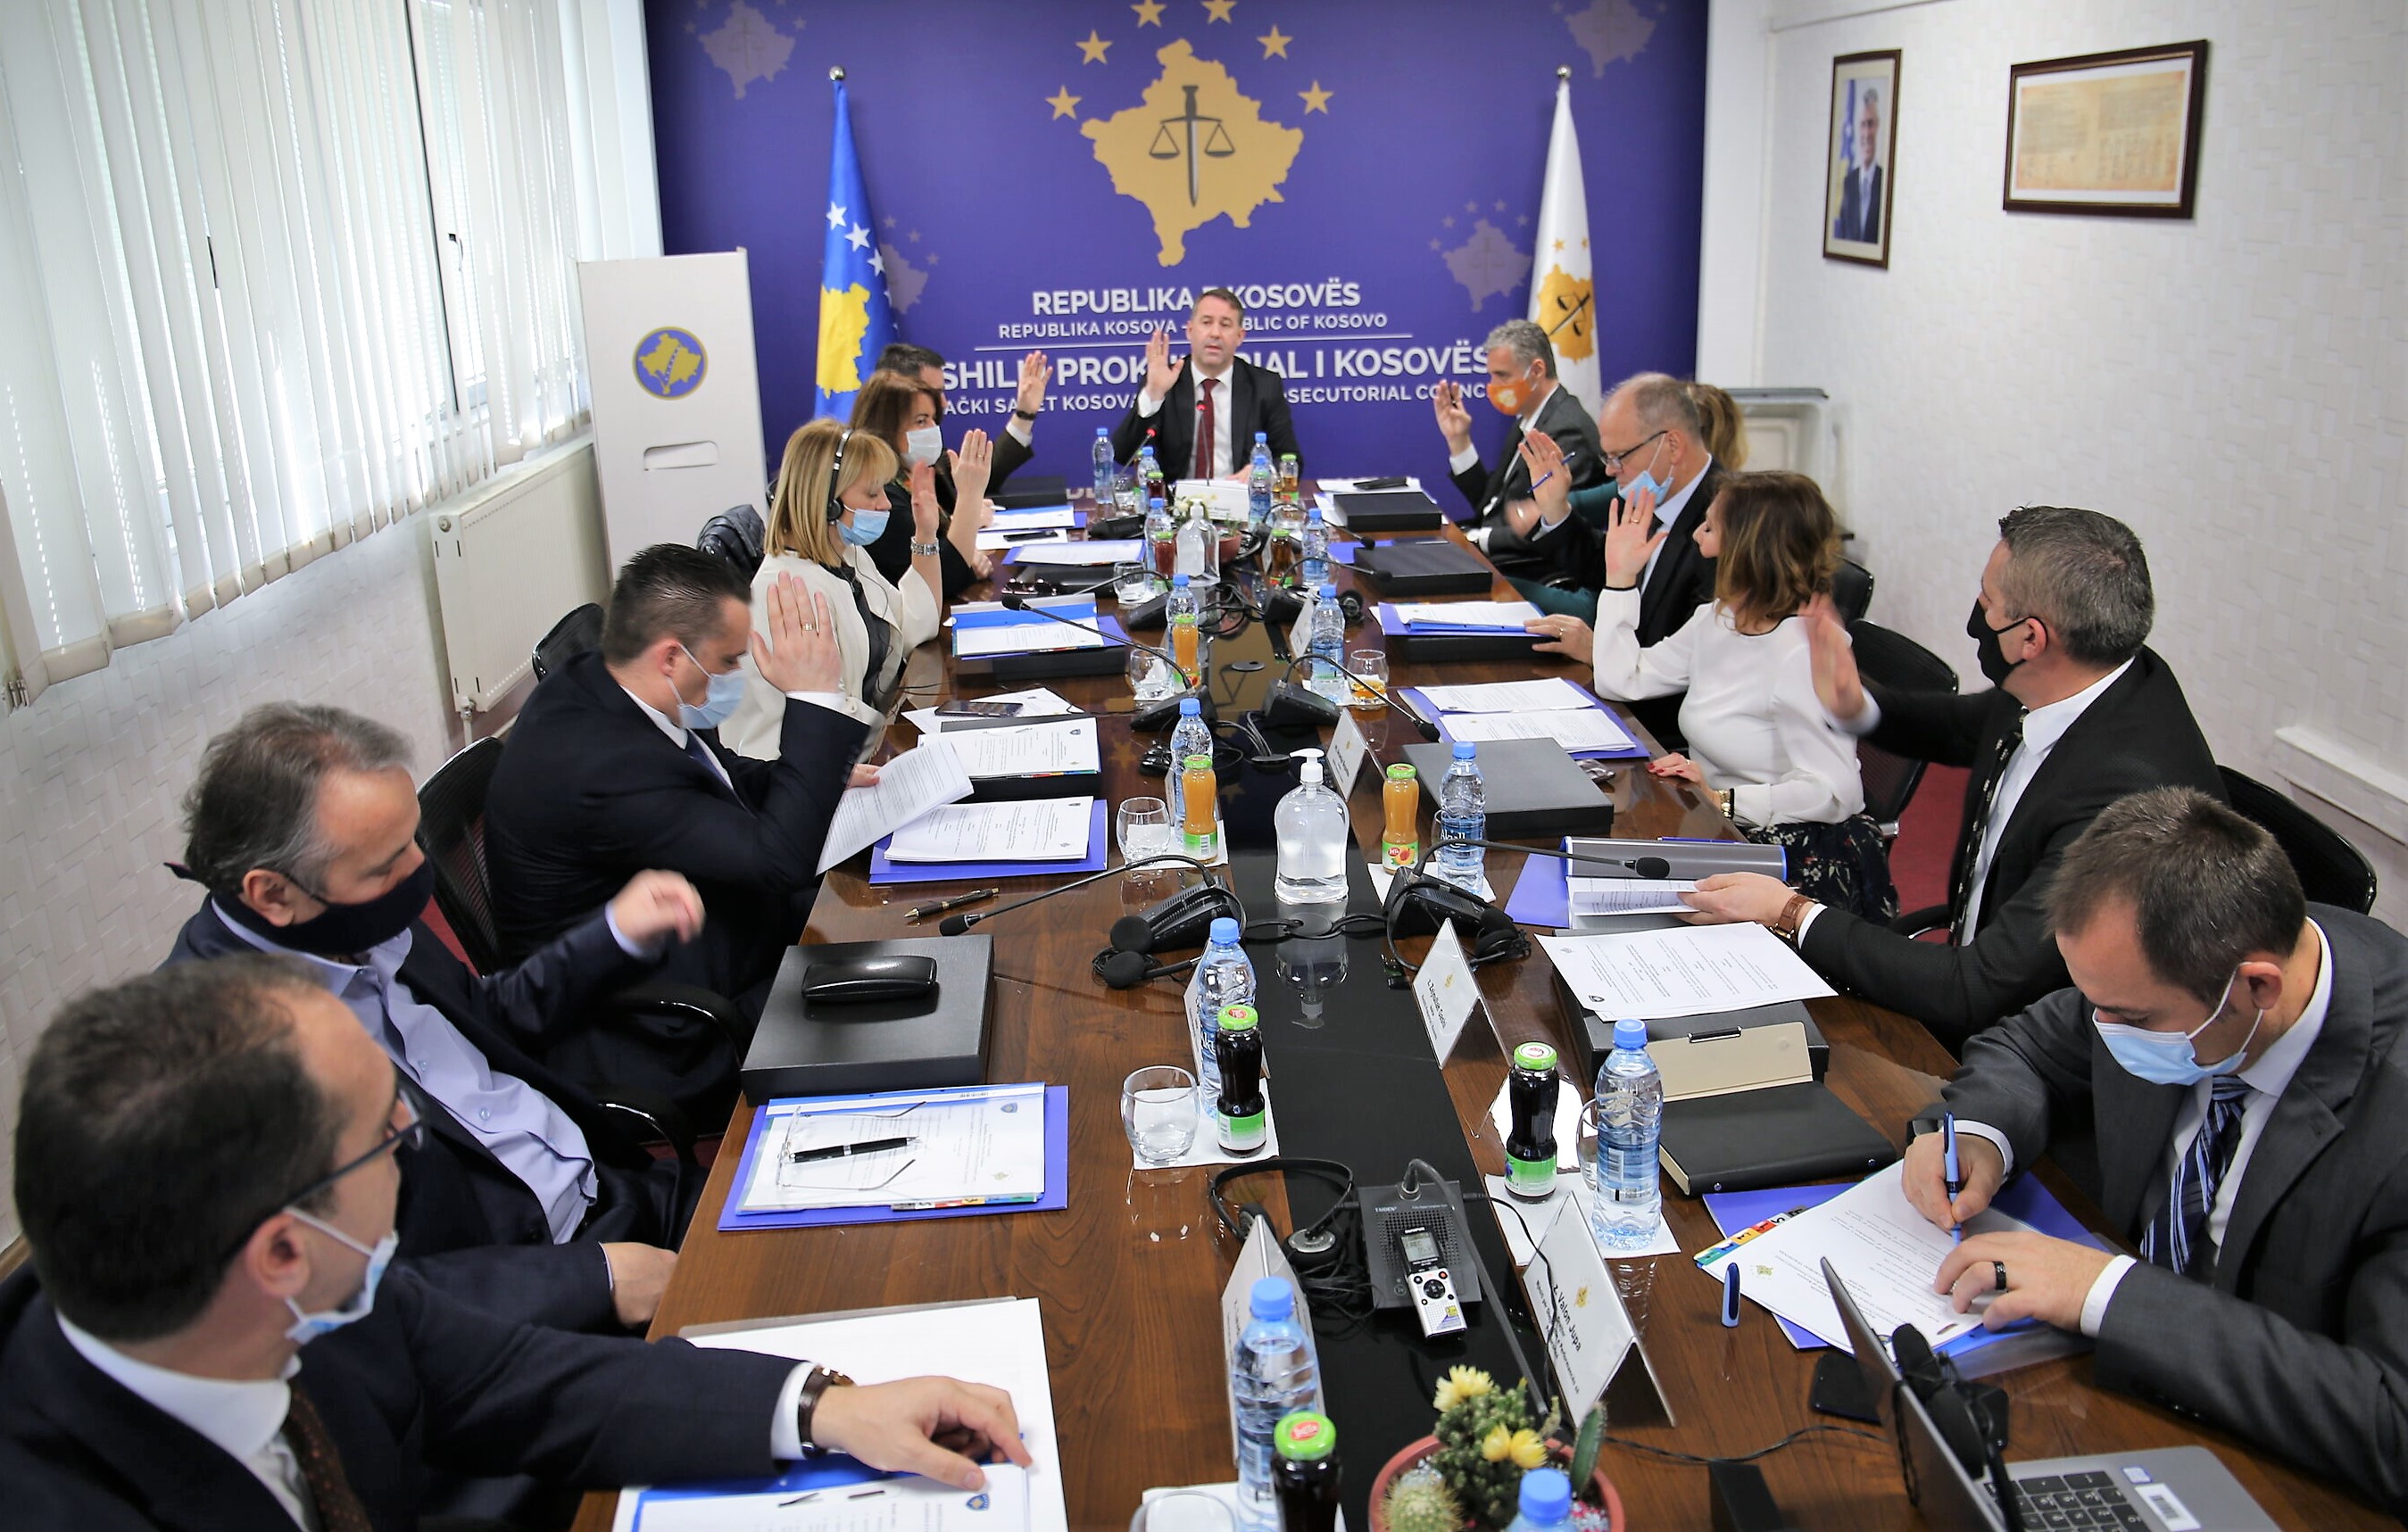 The Chief Prosecutor of the Appellate Prosecution and the Chief Prosecutors of the 6 Basic Prosecution Offices are elected